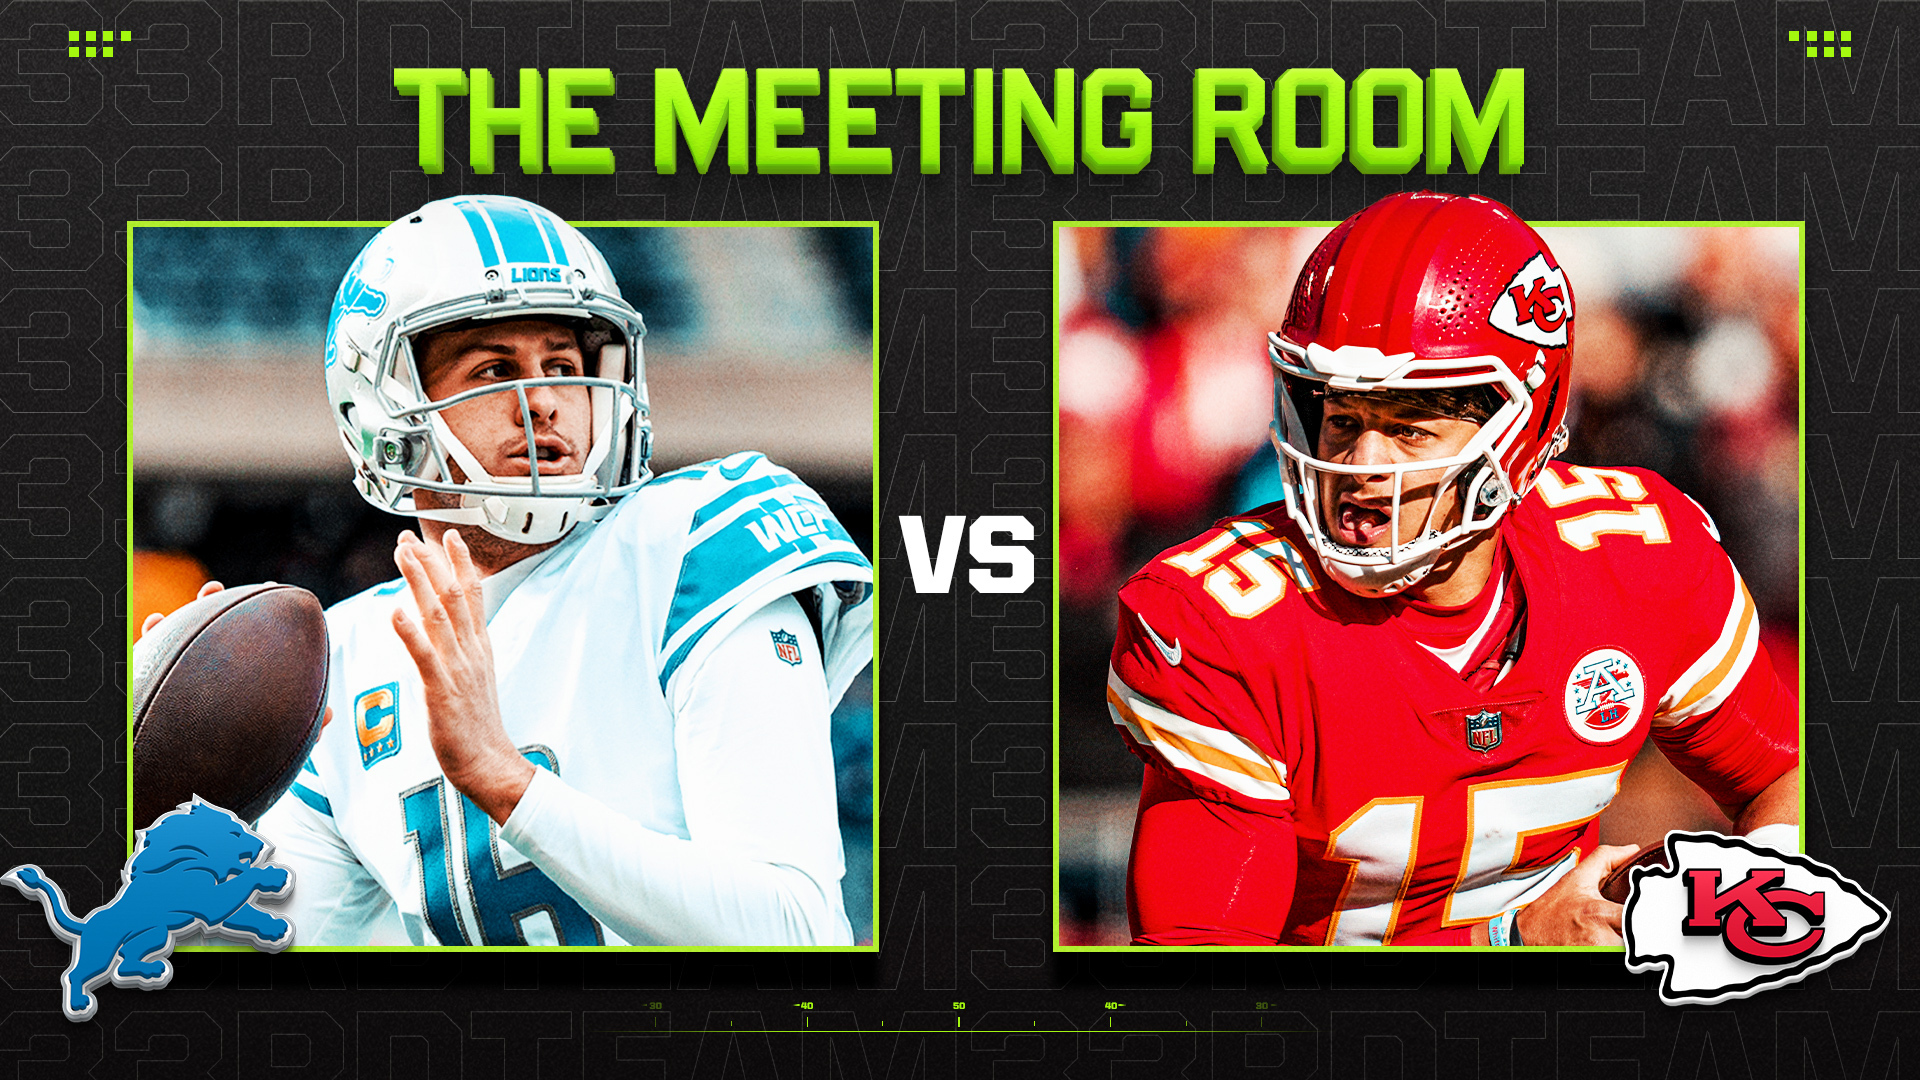 text reads "the Meeting Room" and shows Jared Goff in an away jersey "vs." Patrick Mahomes in a home jersey